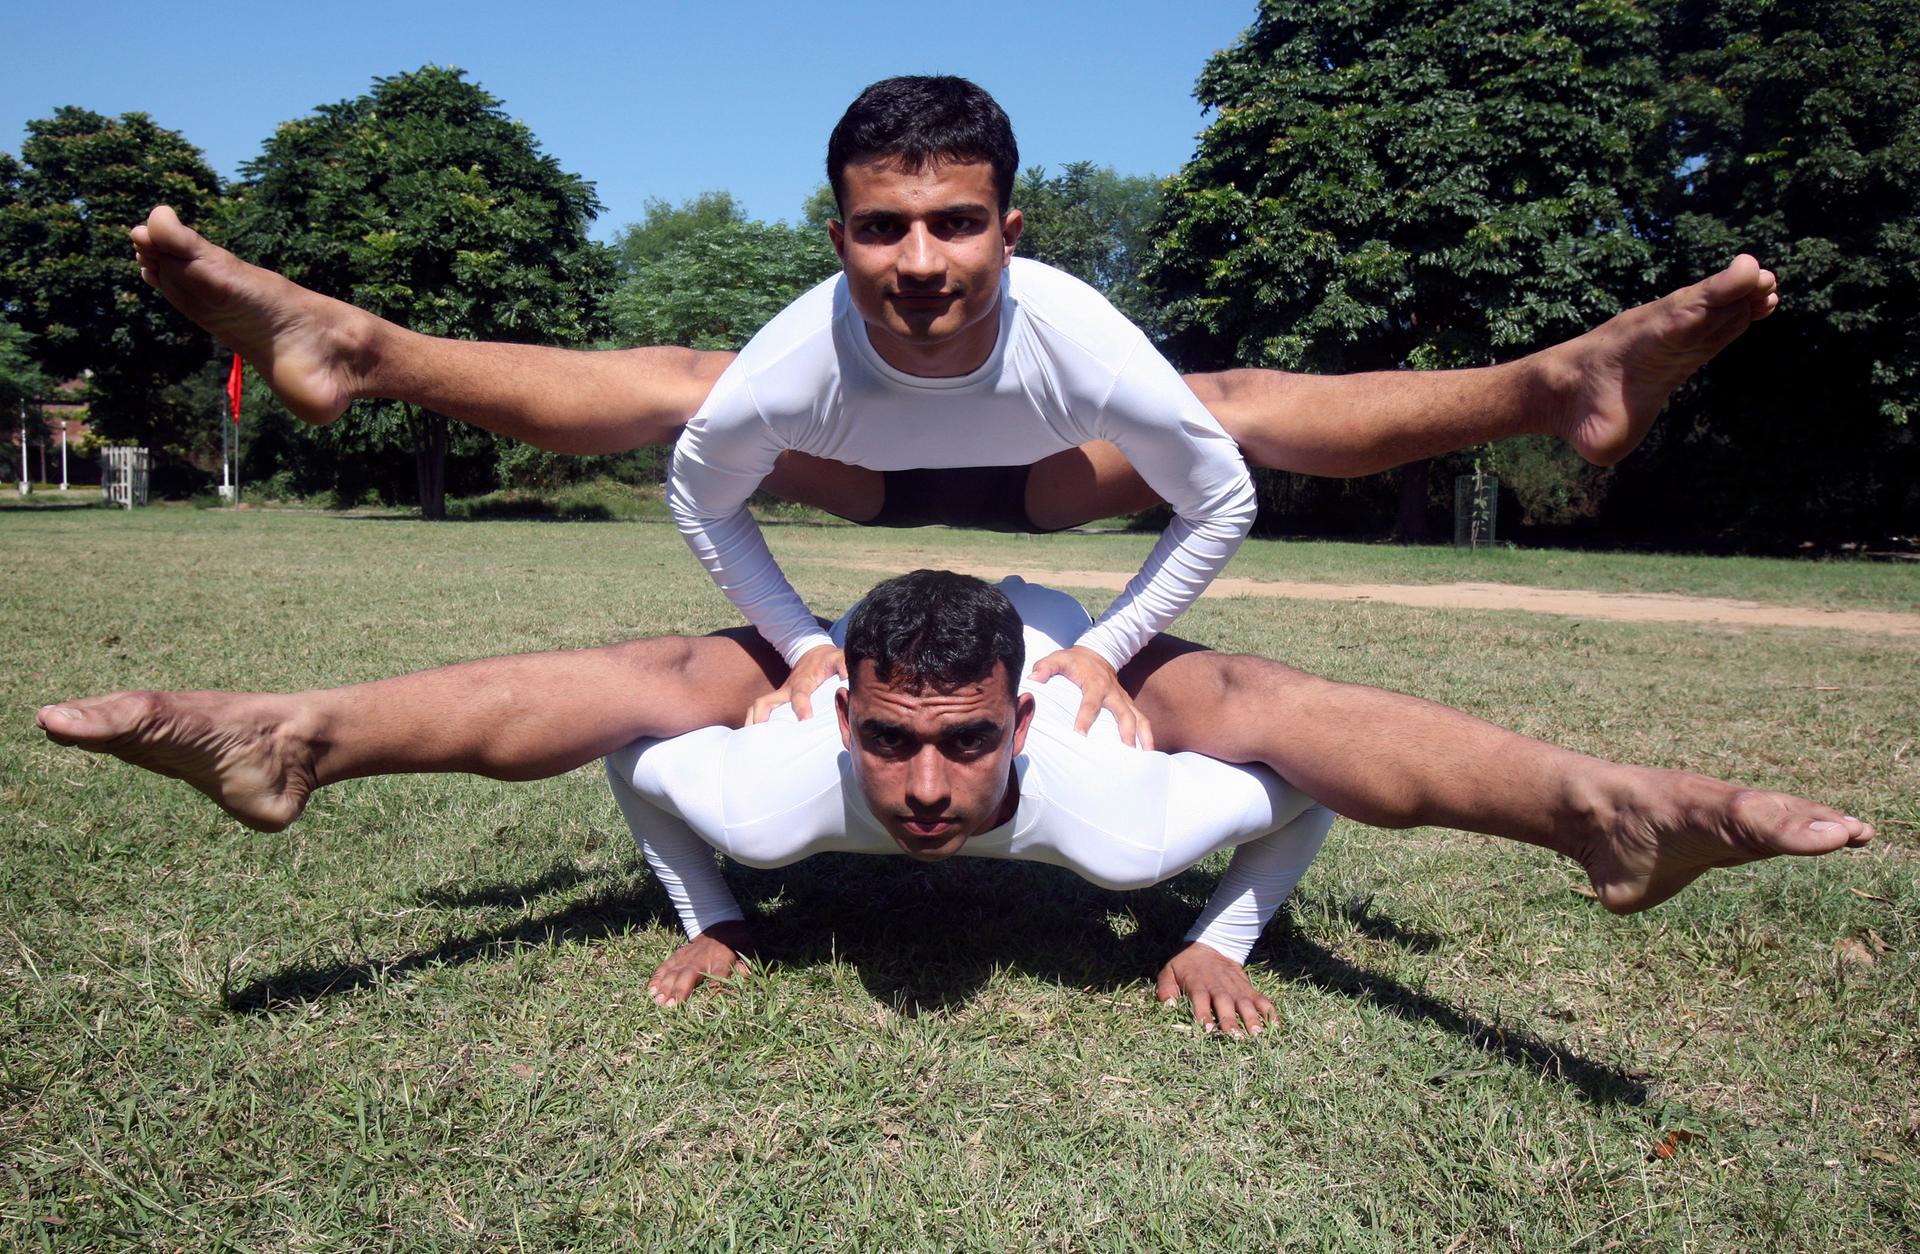 Two men perform difficult pose on grass lawn